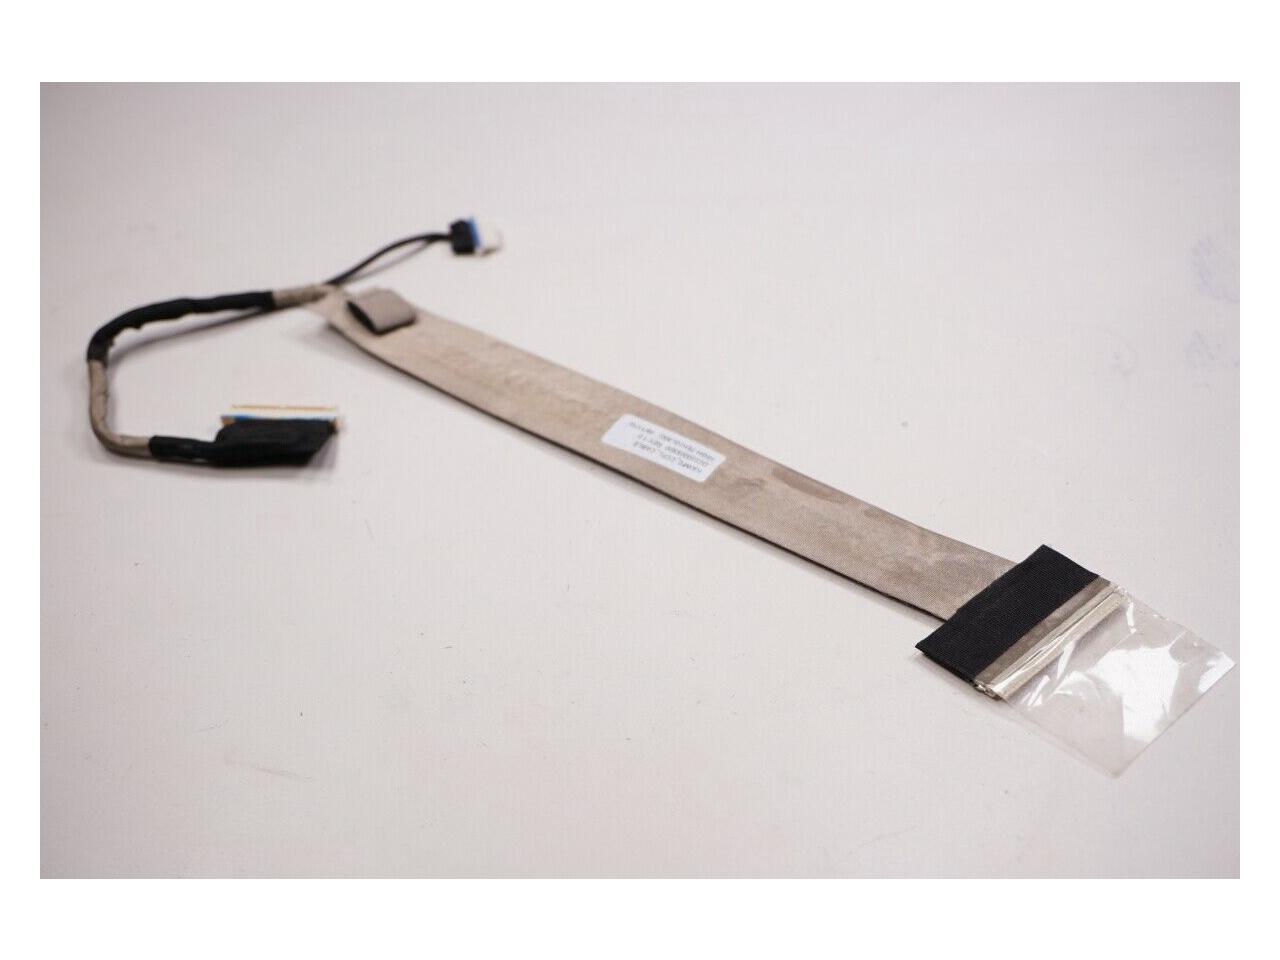 50.PJA01.005 Acer Aspire Series 7540 LCD Cable 